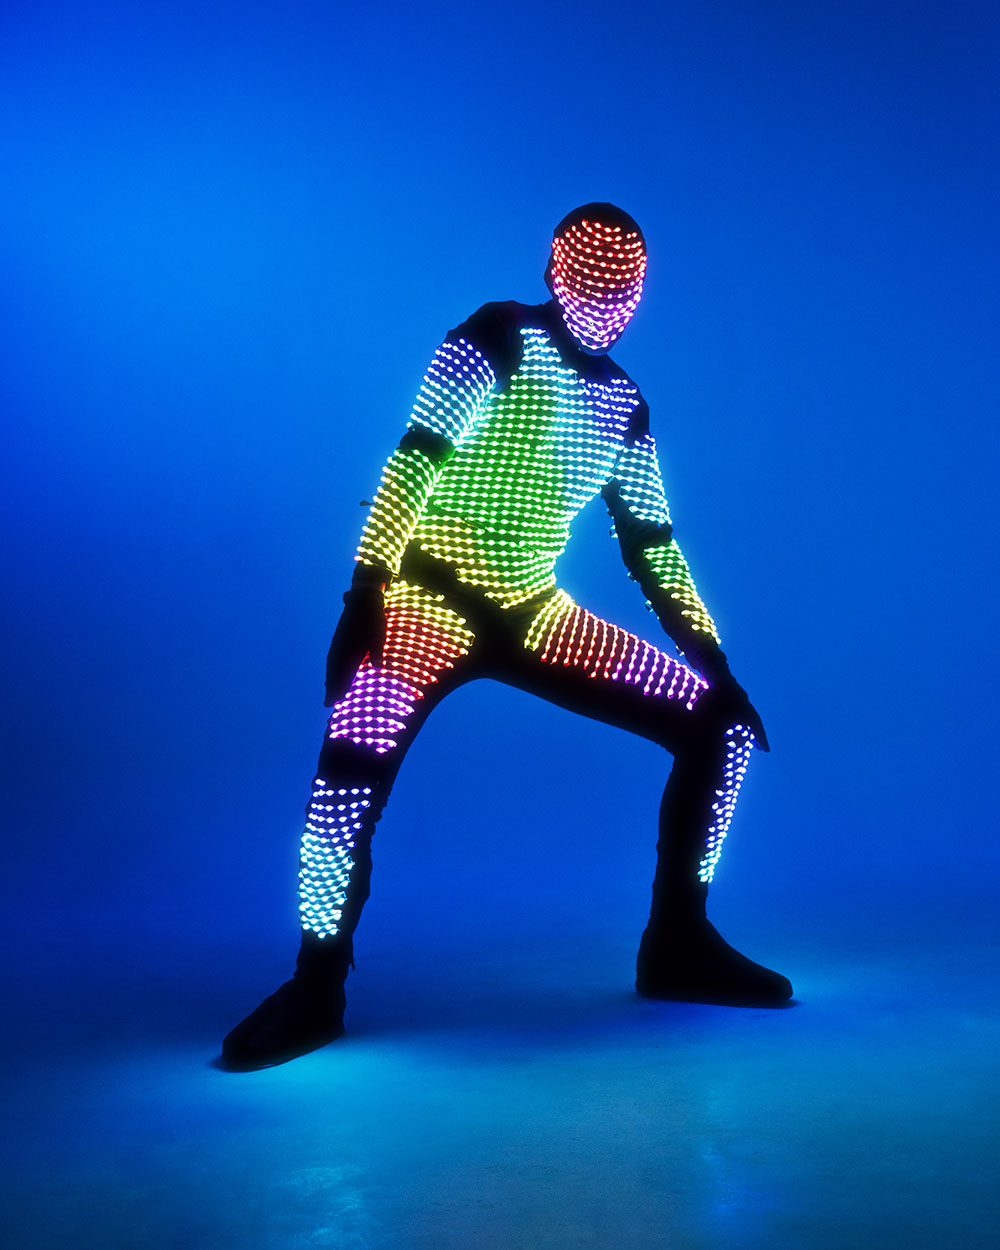 Dance LED light costume with a -